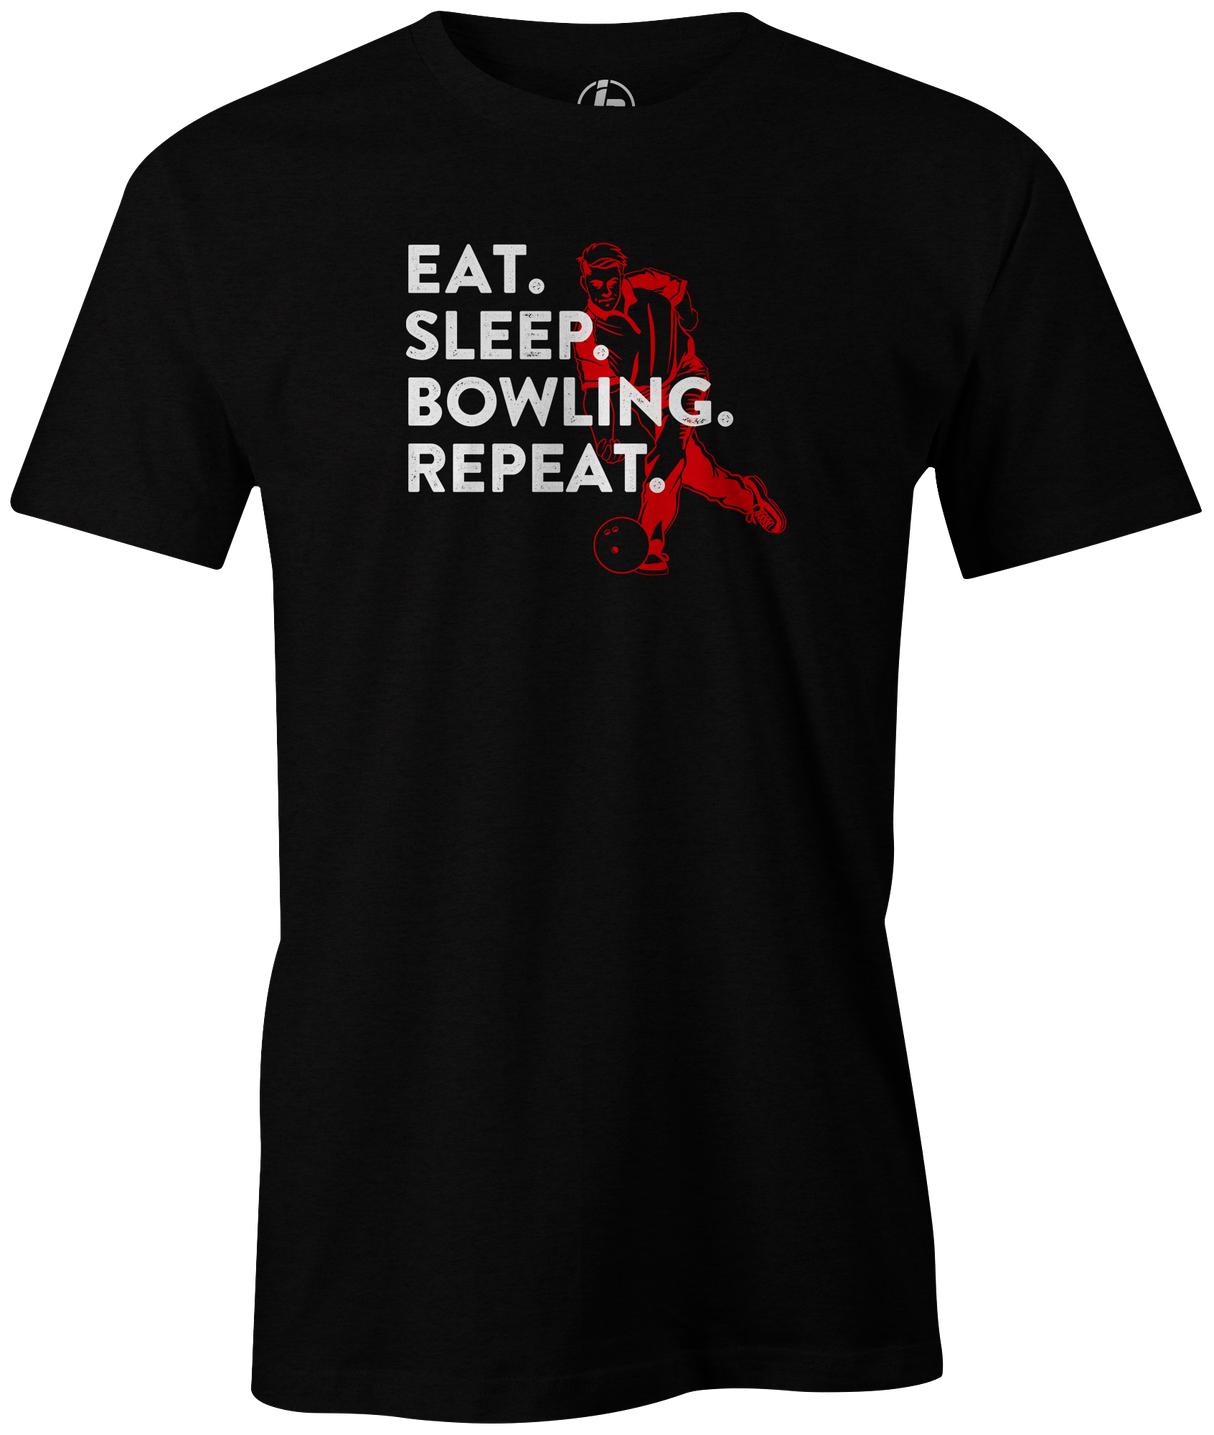 Eat Sleep Bowling Repeat Men's Bowling shirt, black, tee, tee-shirt, tee shirt, apparel, merch, cool, funny, vintage, father's day, gift, present, cheap, discount, free shipping, lifestlye.